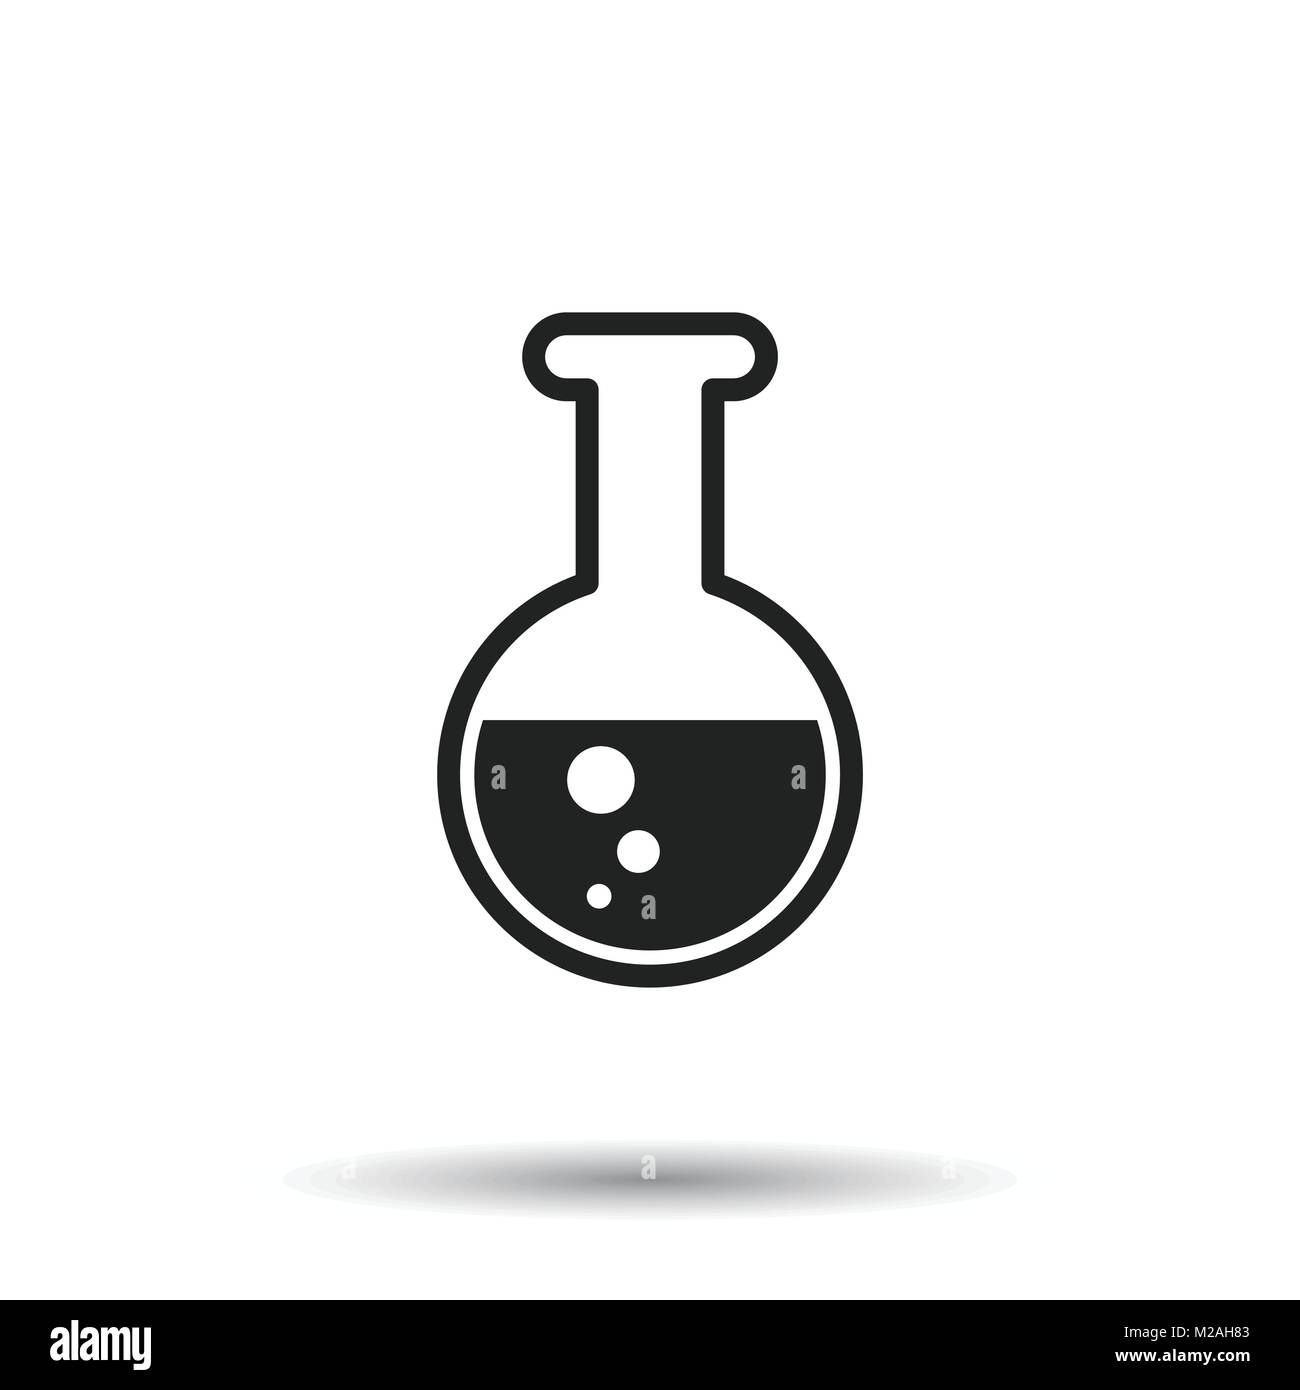 Chemical test tube pictogram icon. Chemical lab equipment isolated on white background. Experiment flasks for science experiment. Trendy modern vector Stock Vector